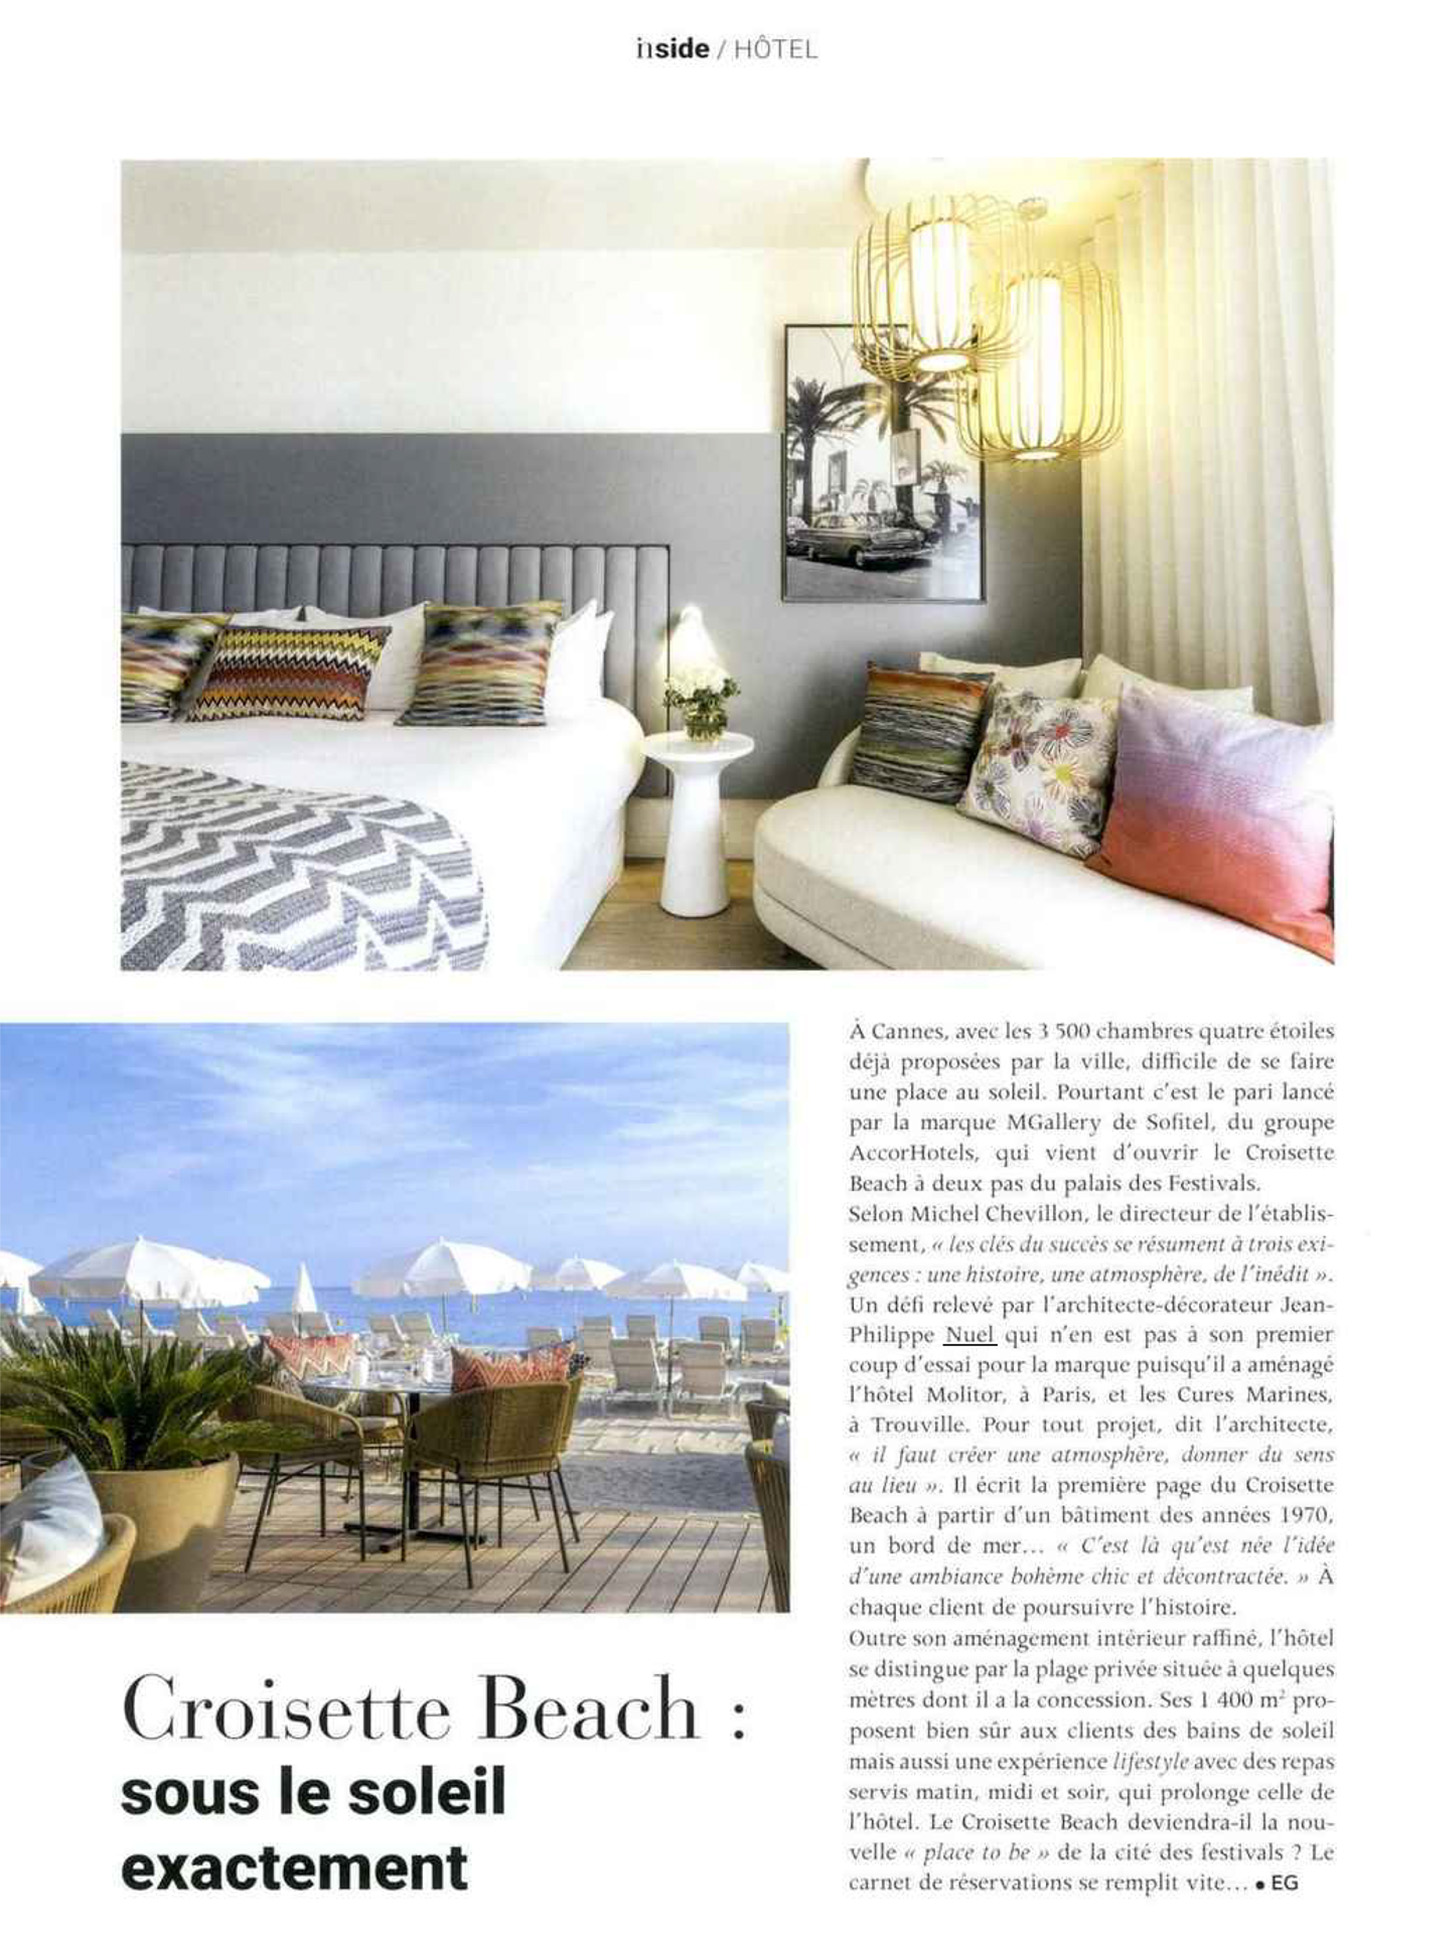 Article on the Croisette Beach Hotel Cannes realized by the studio jean-Philippe Nuel in the magazine In Interiors, new luxury hotel, luxury interior design, seaside hotel